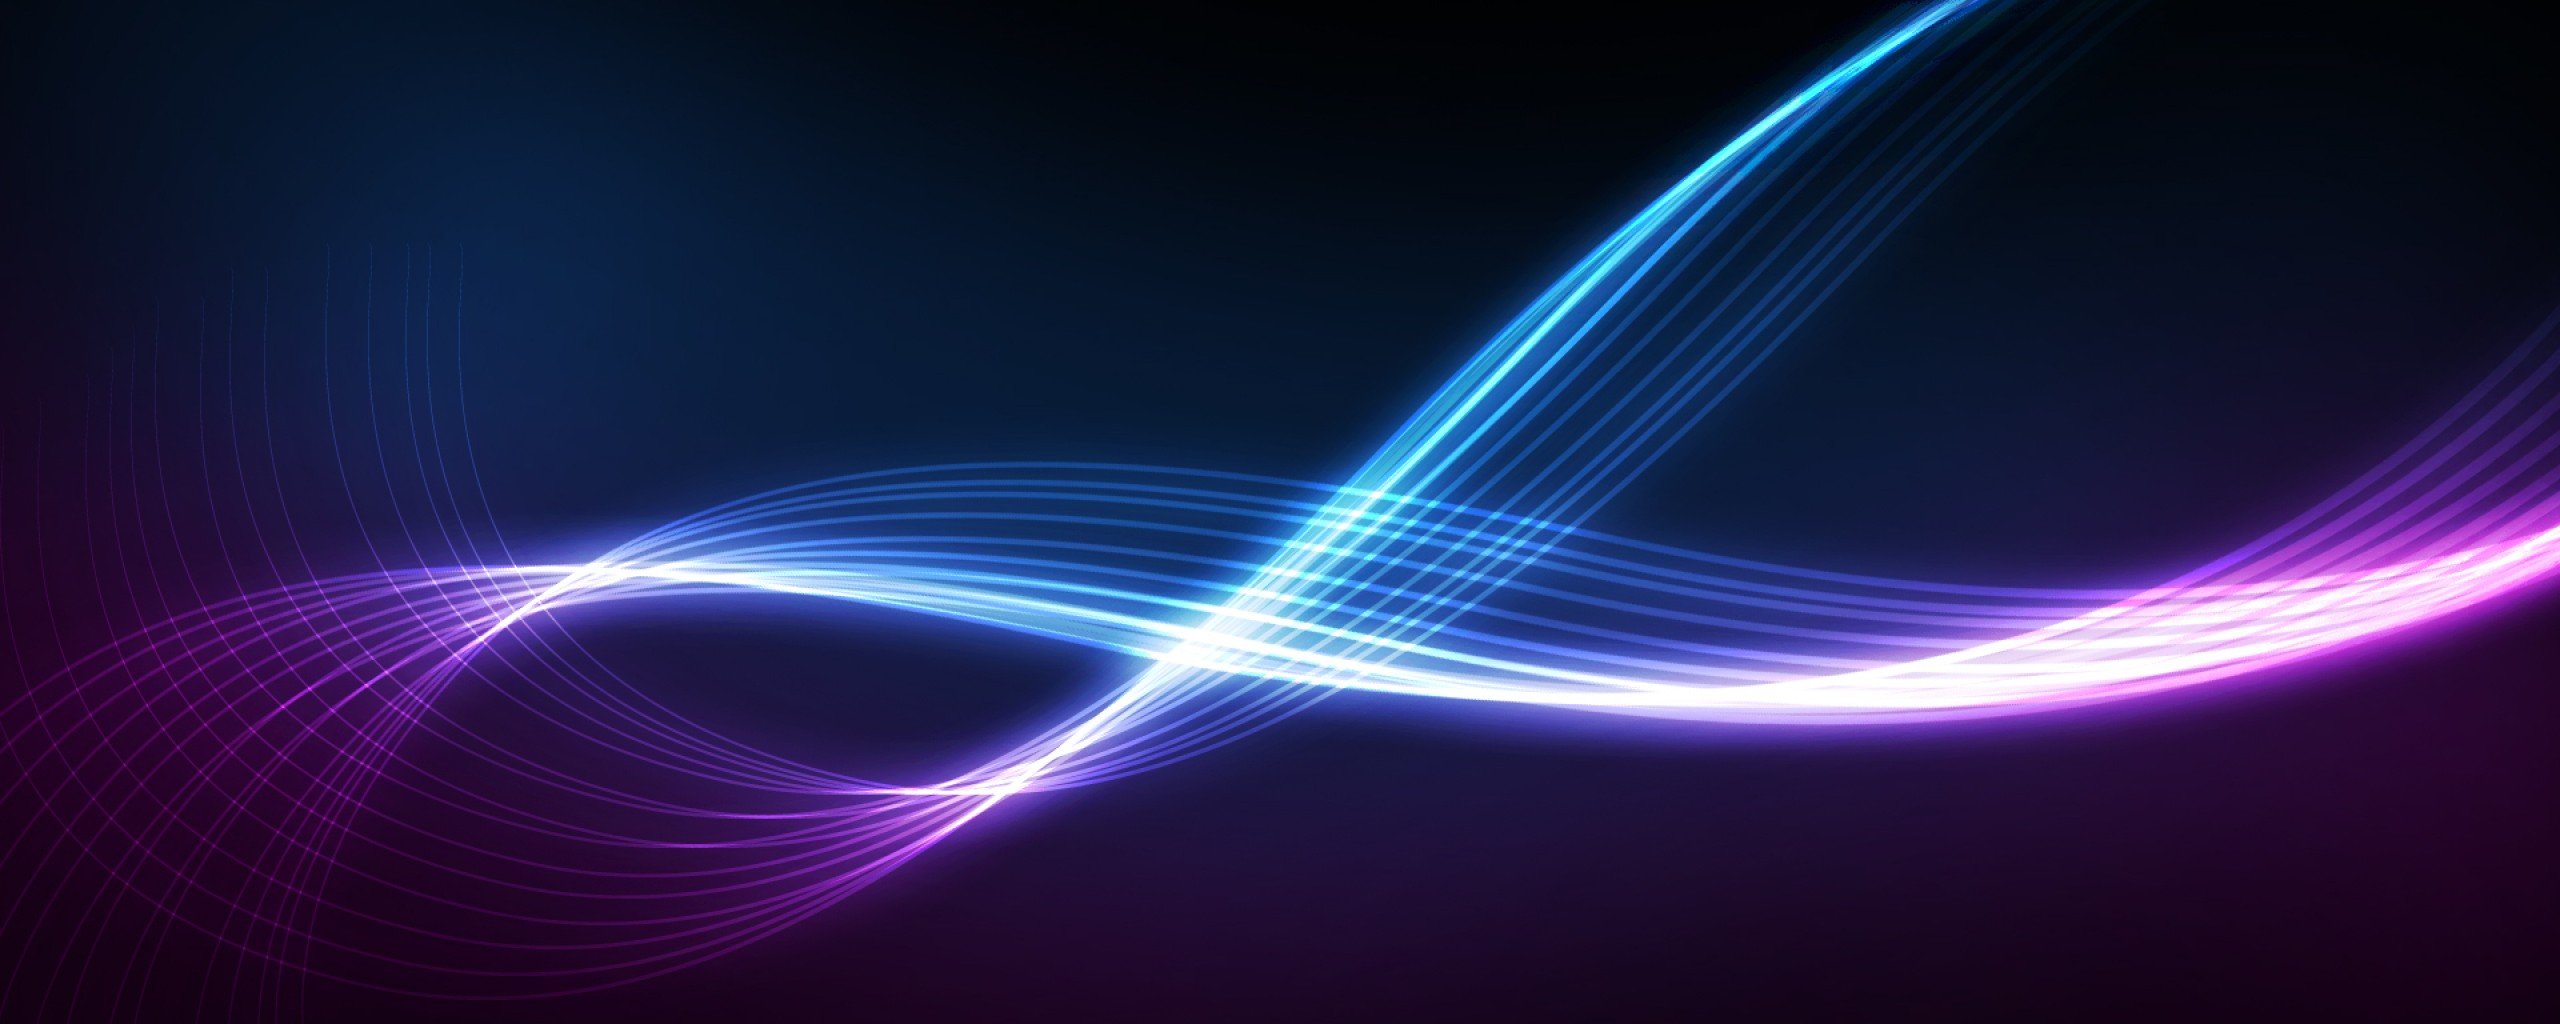 Purple and Blue Wallpapers HD wallpaper background 2560x1024